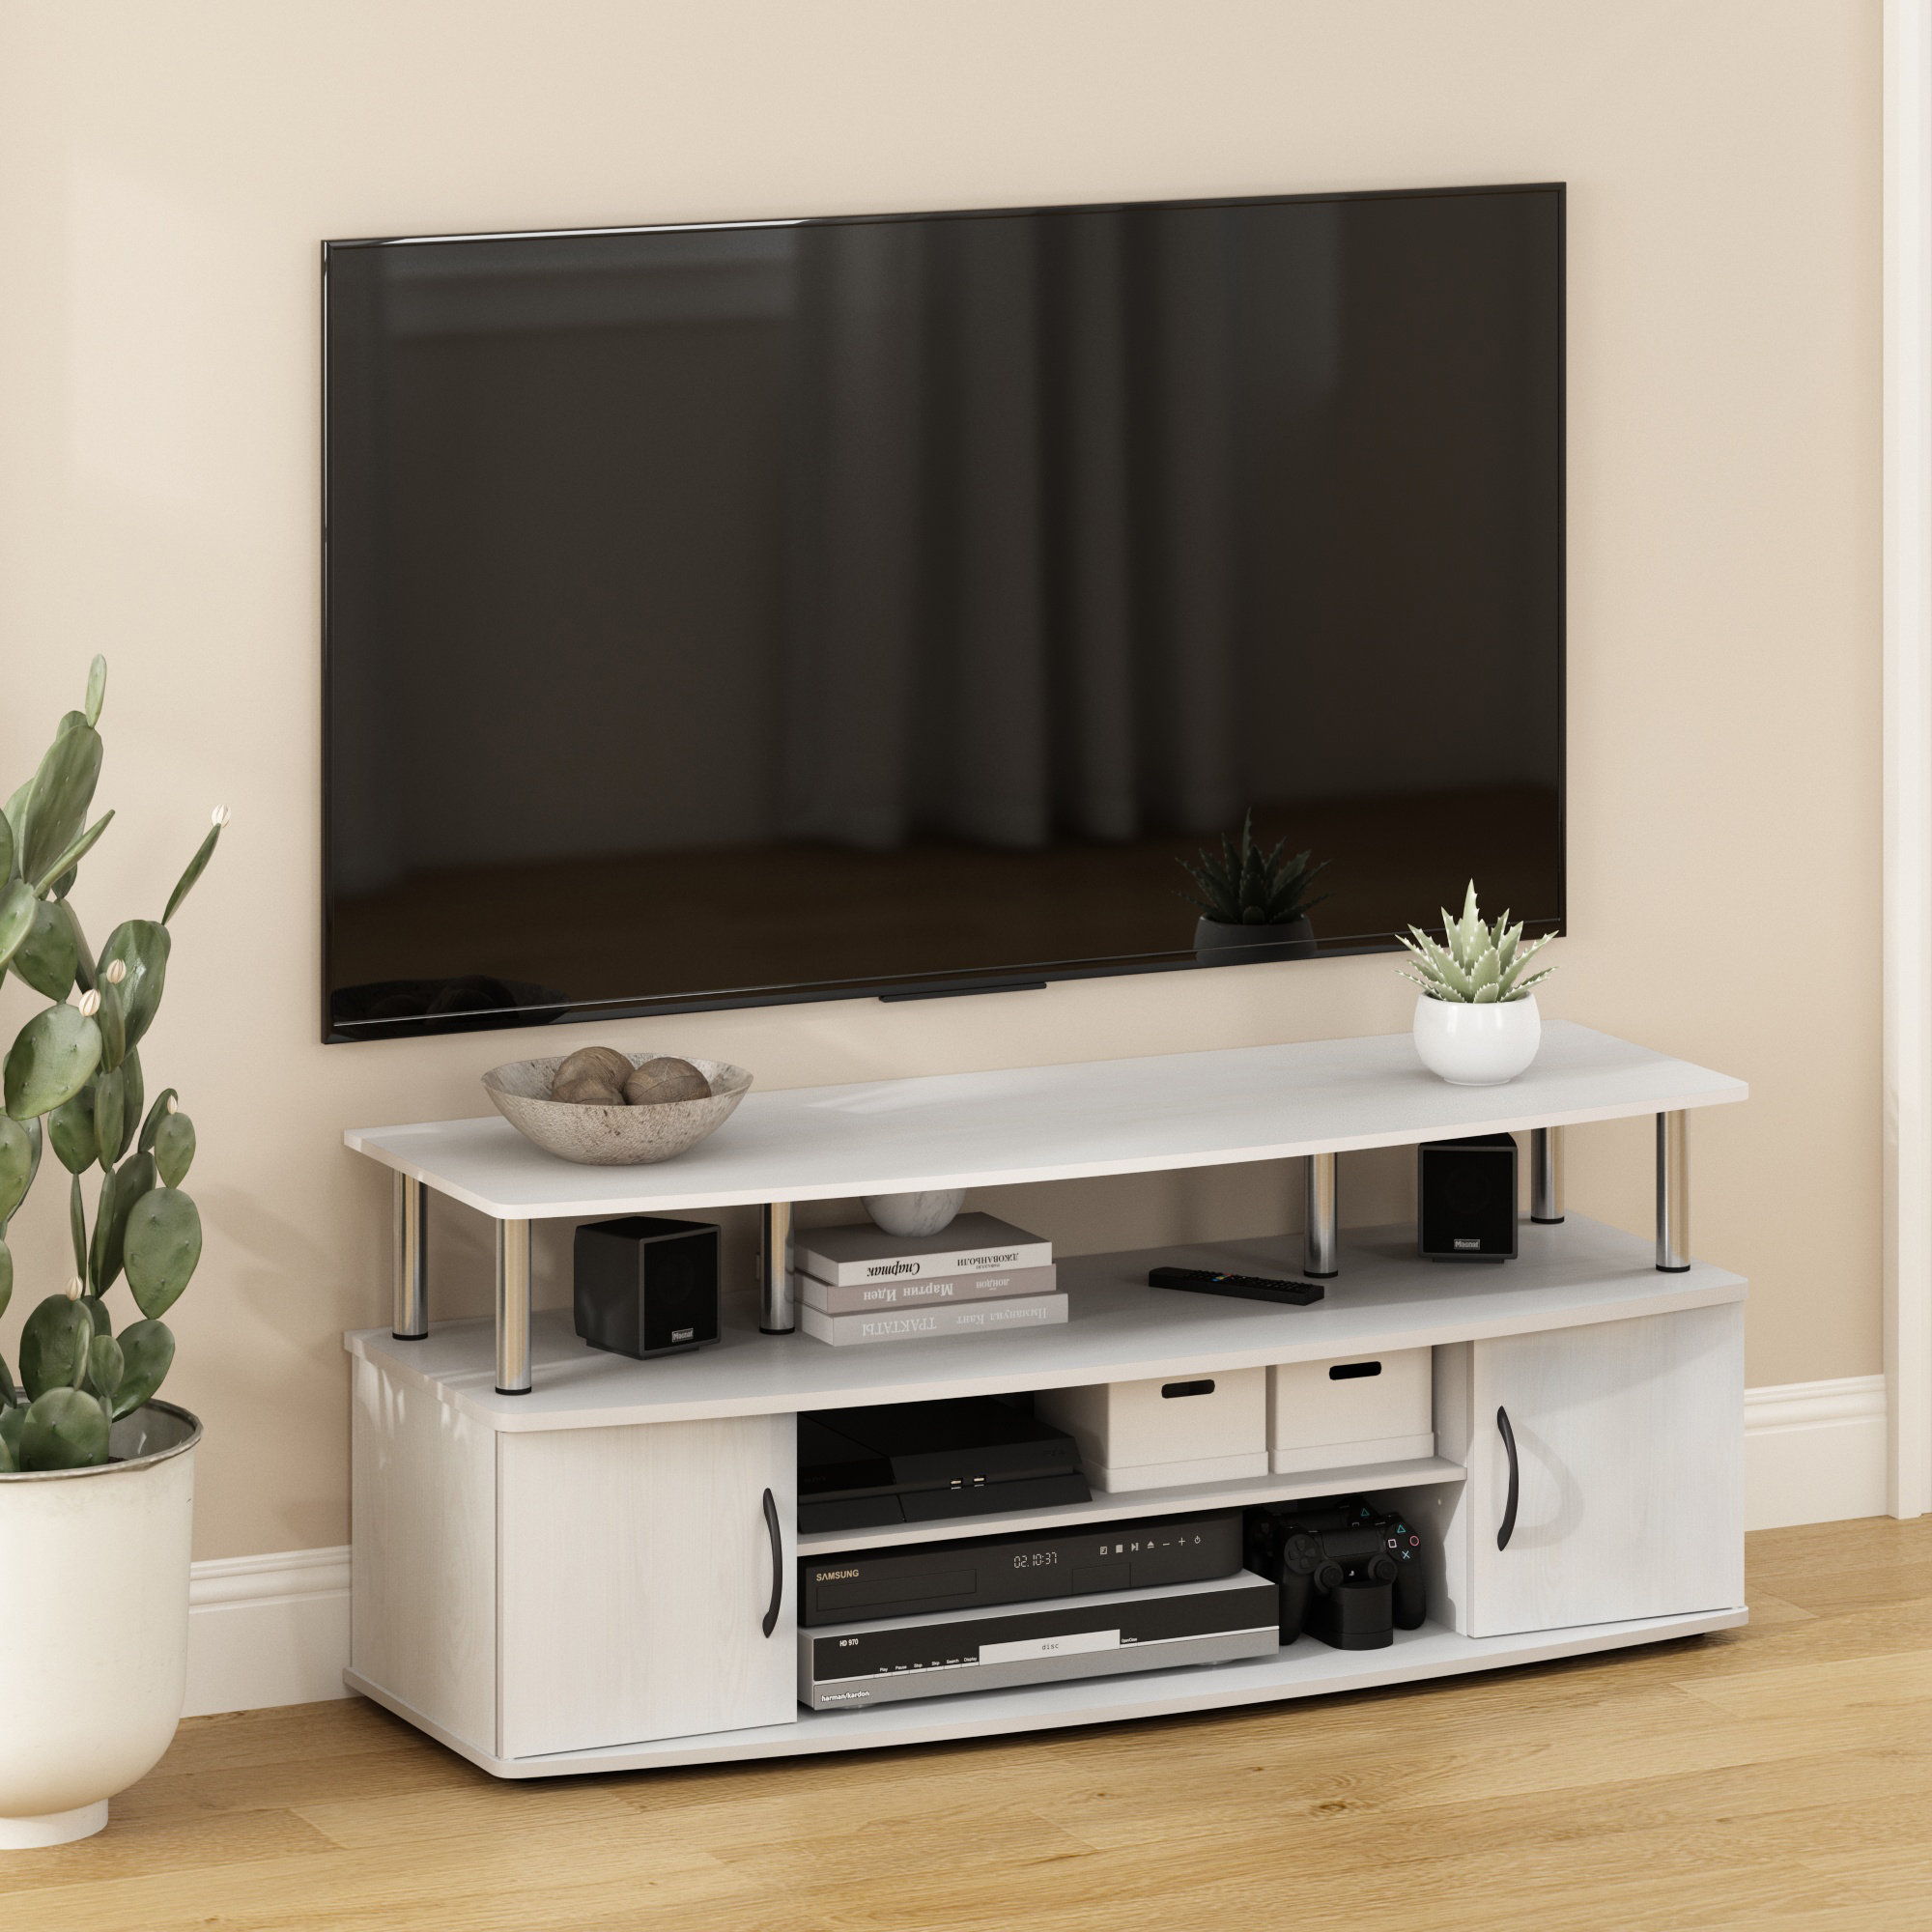 AVF Eno Oval 600 Pedestal TV Stand - Silver/White - fits up to 55 inch TV